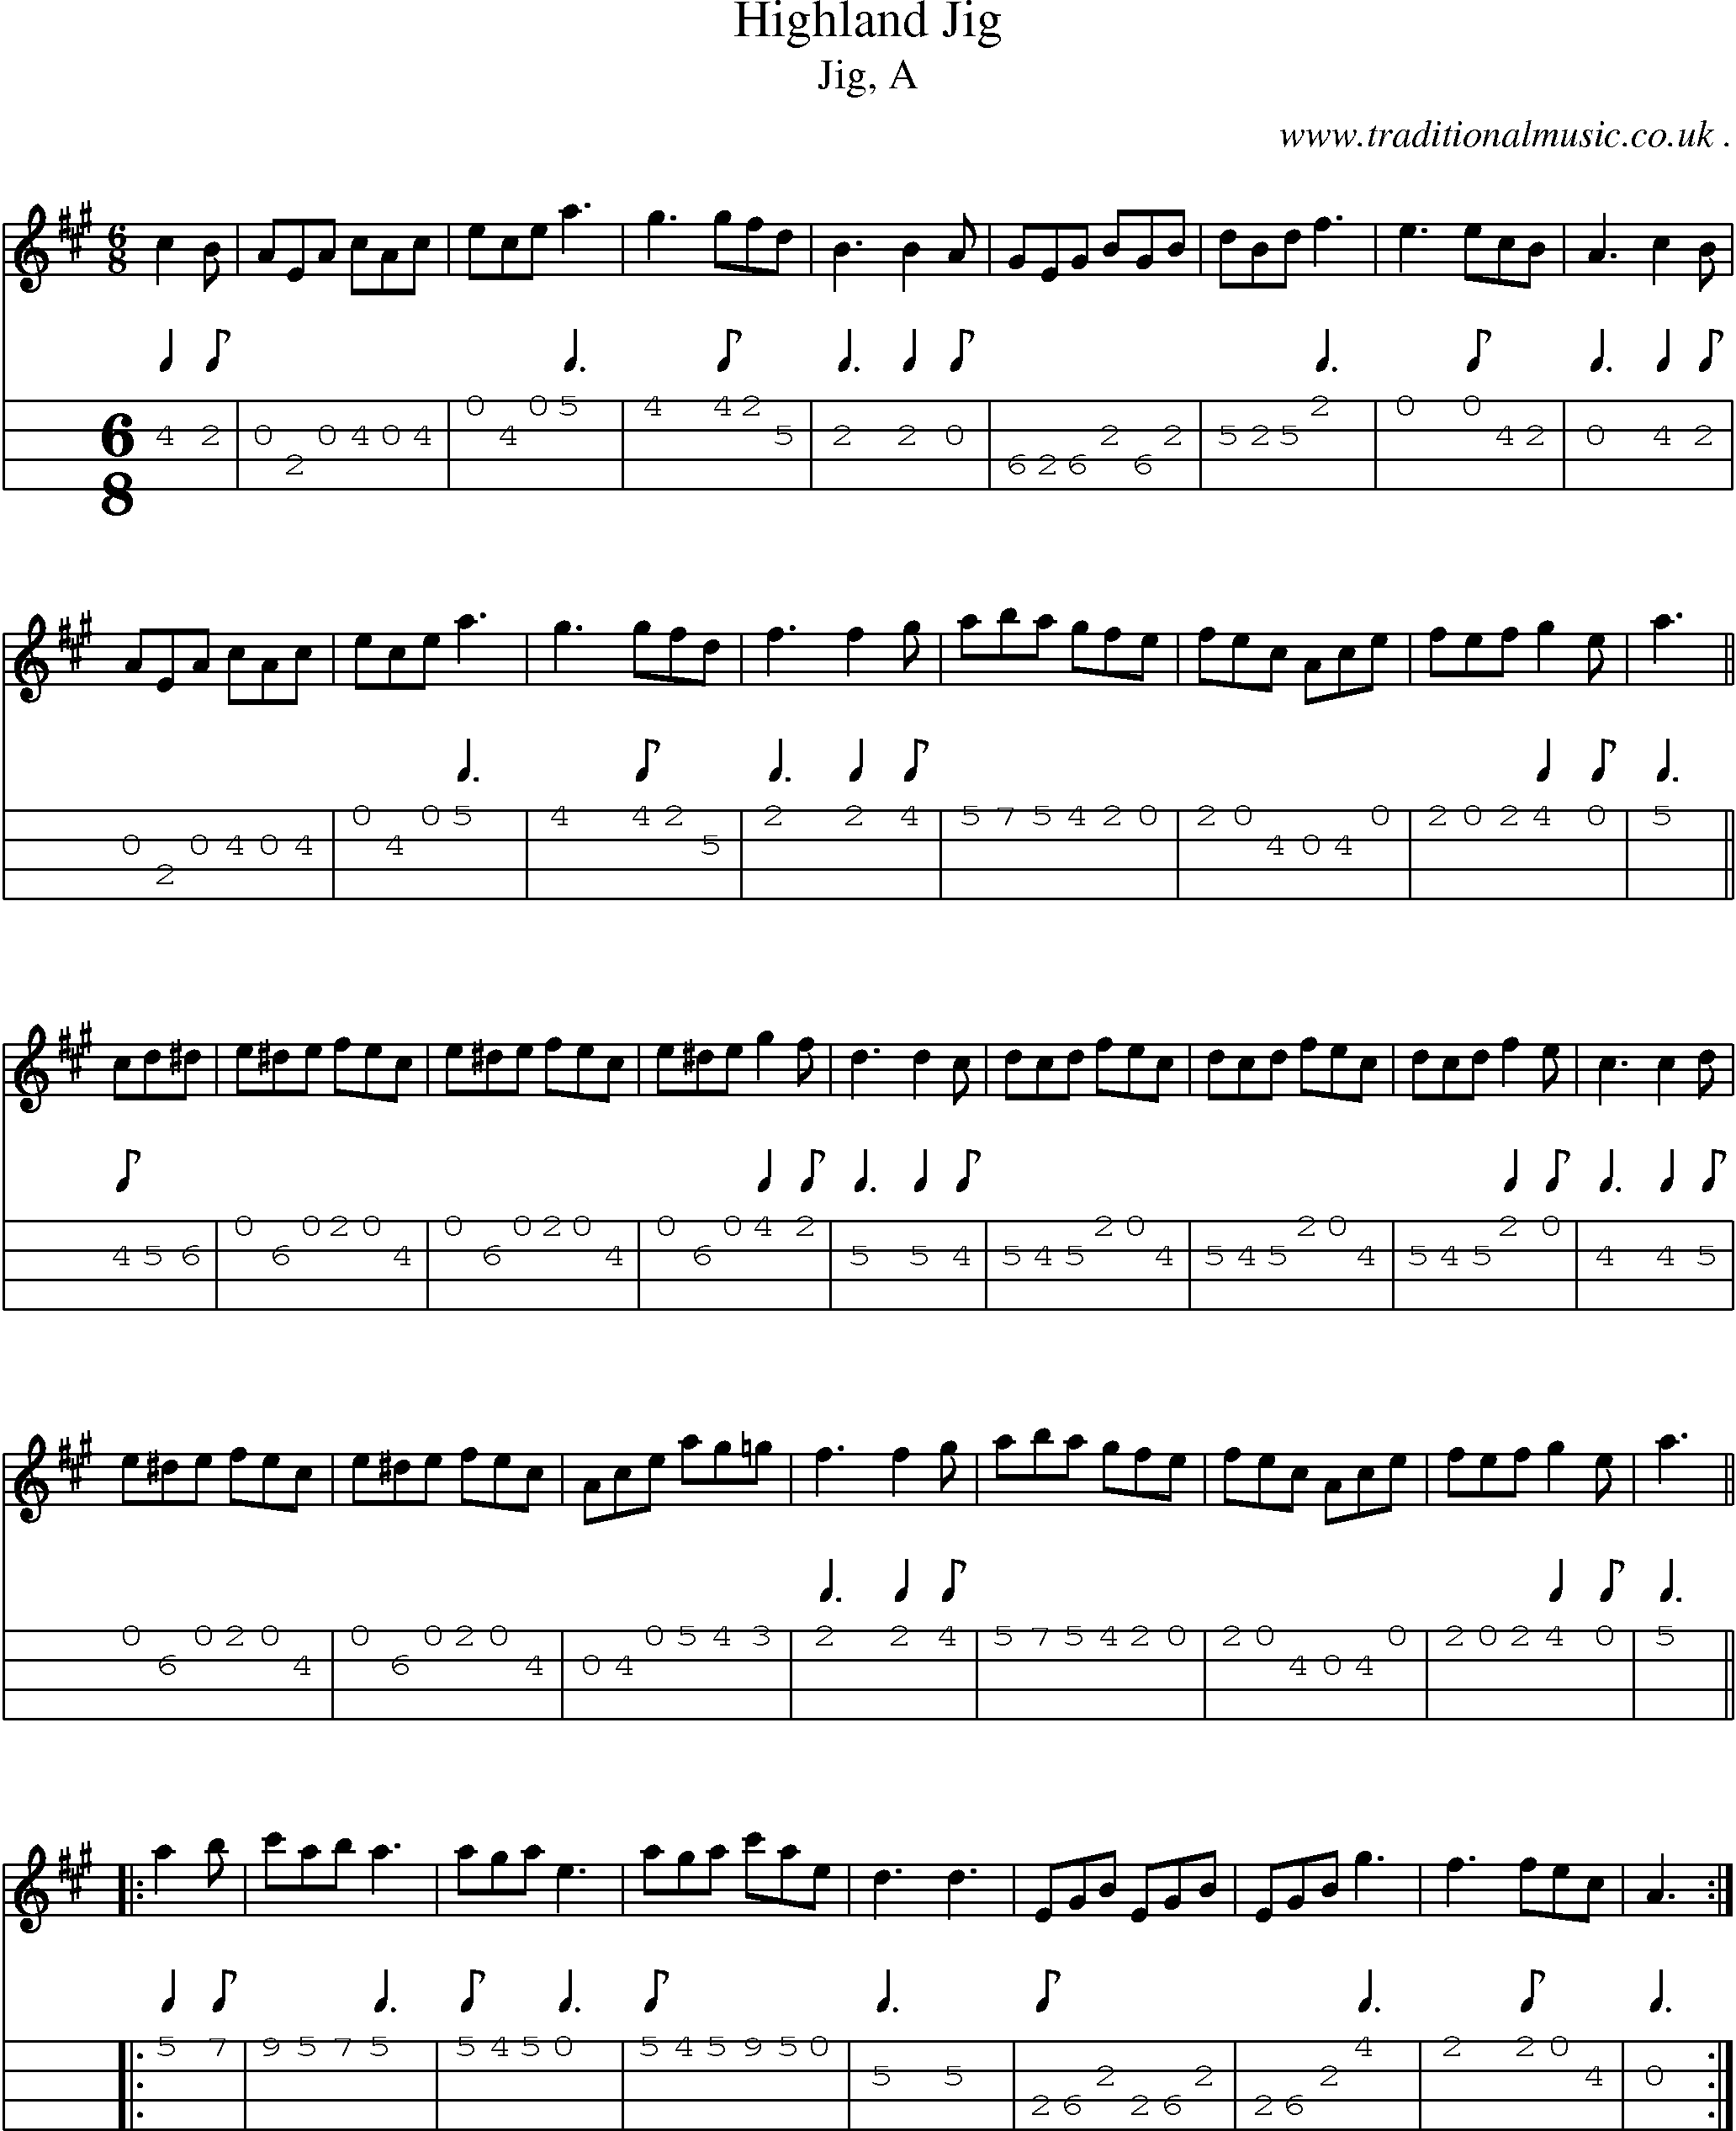 Sheet-music  score, Chords and Mandolin Tabs for Highland Jig